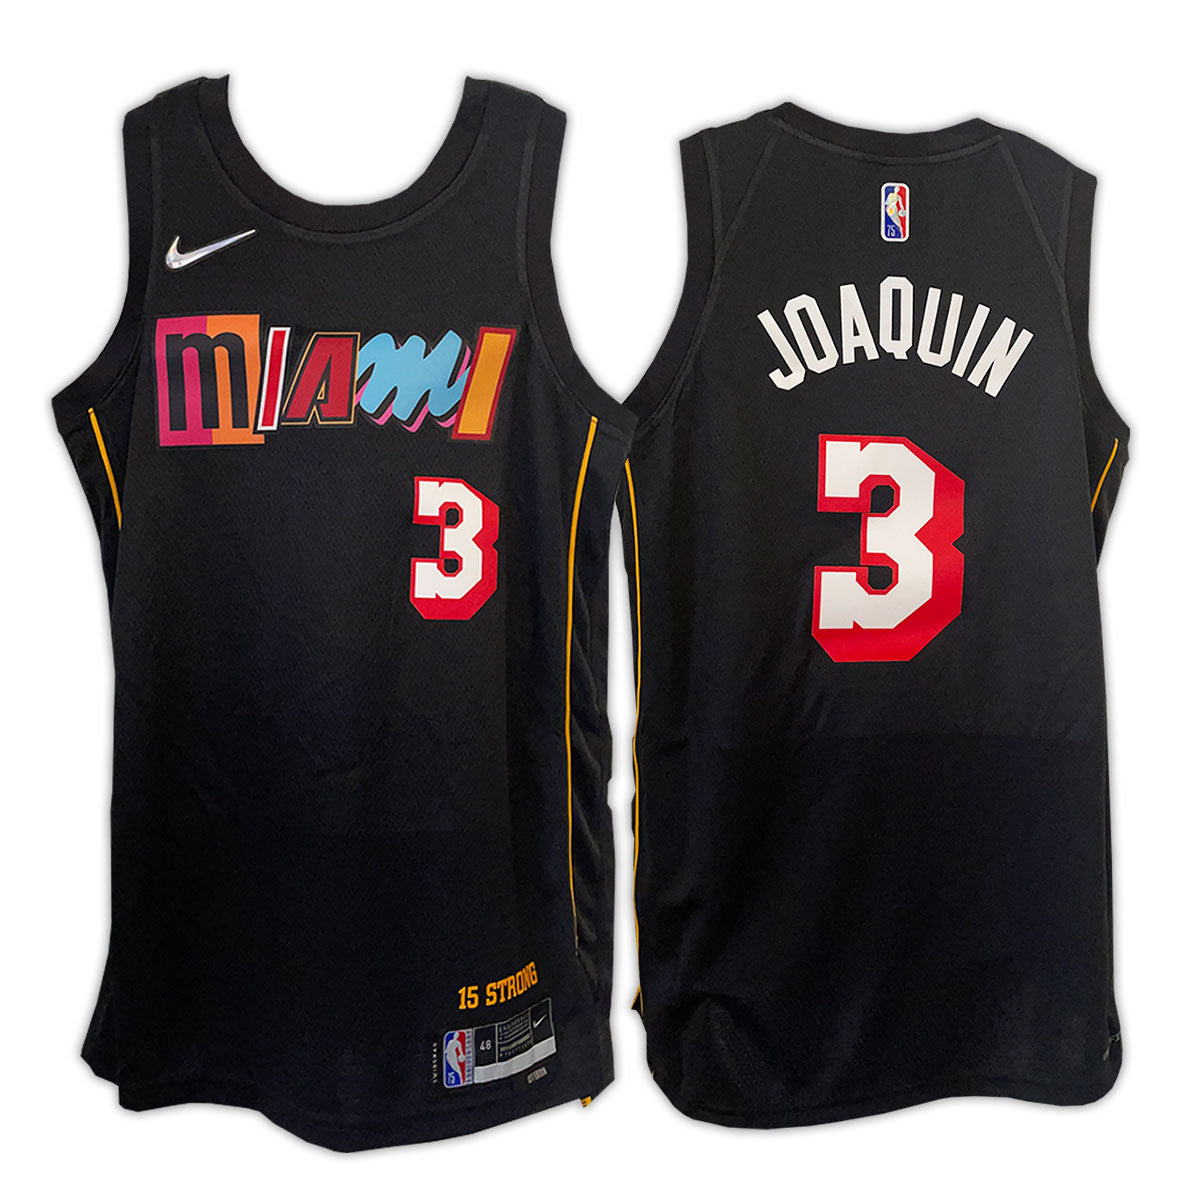 ONE OF A KIND NBA OFFICIAL JOAQUIN #3 NIKE MIAMI HEAT MASHUP AUTHENT –  ChangeTheRef.org